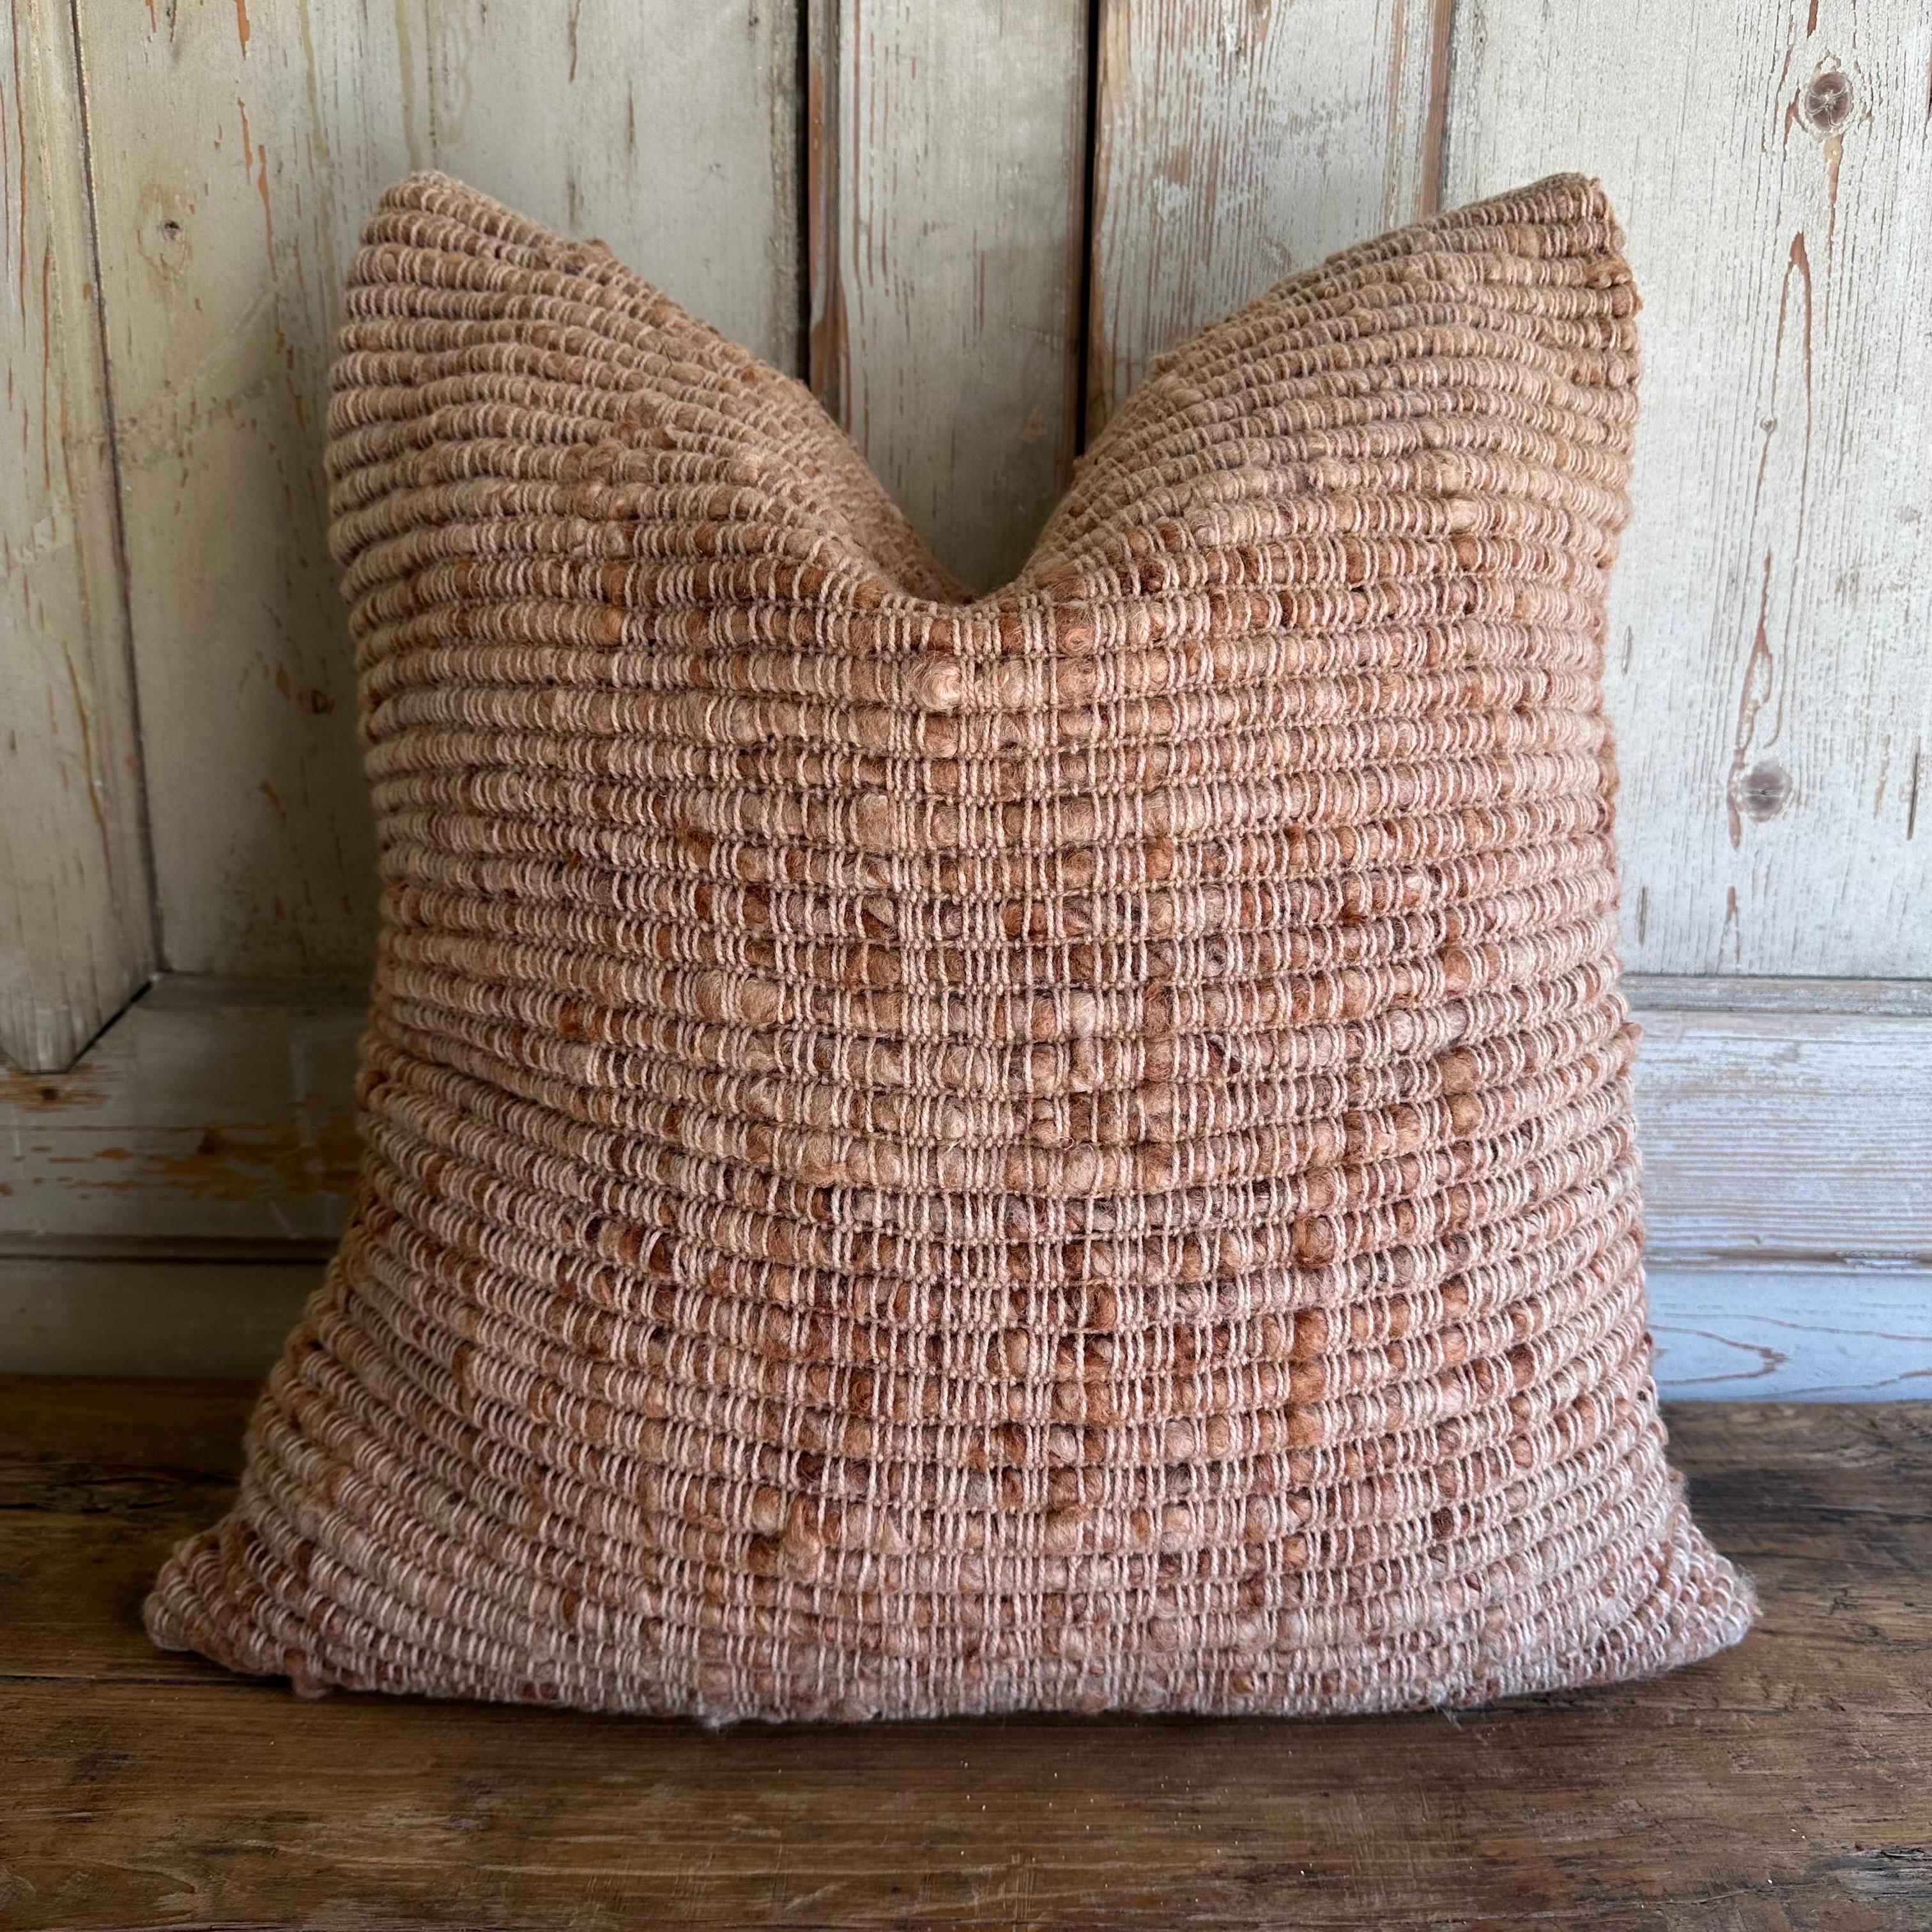 Handmade wool textured pillow.
All of our products are commissioned and handmade by the craftswomen of Chiloé. The textiles are made with 100% wool from ’chilota’ sheep, that are born and raised on the island.The process by which these luxurious